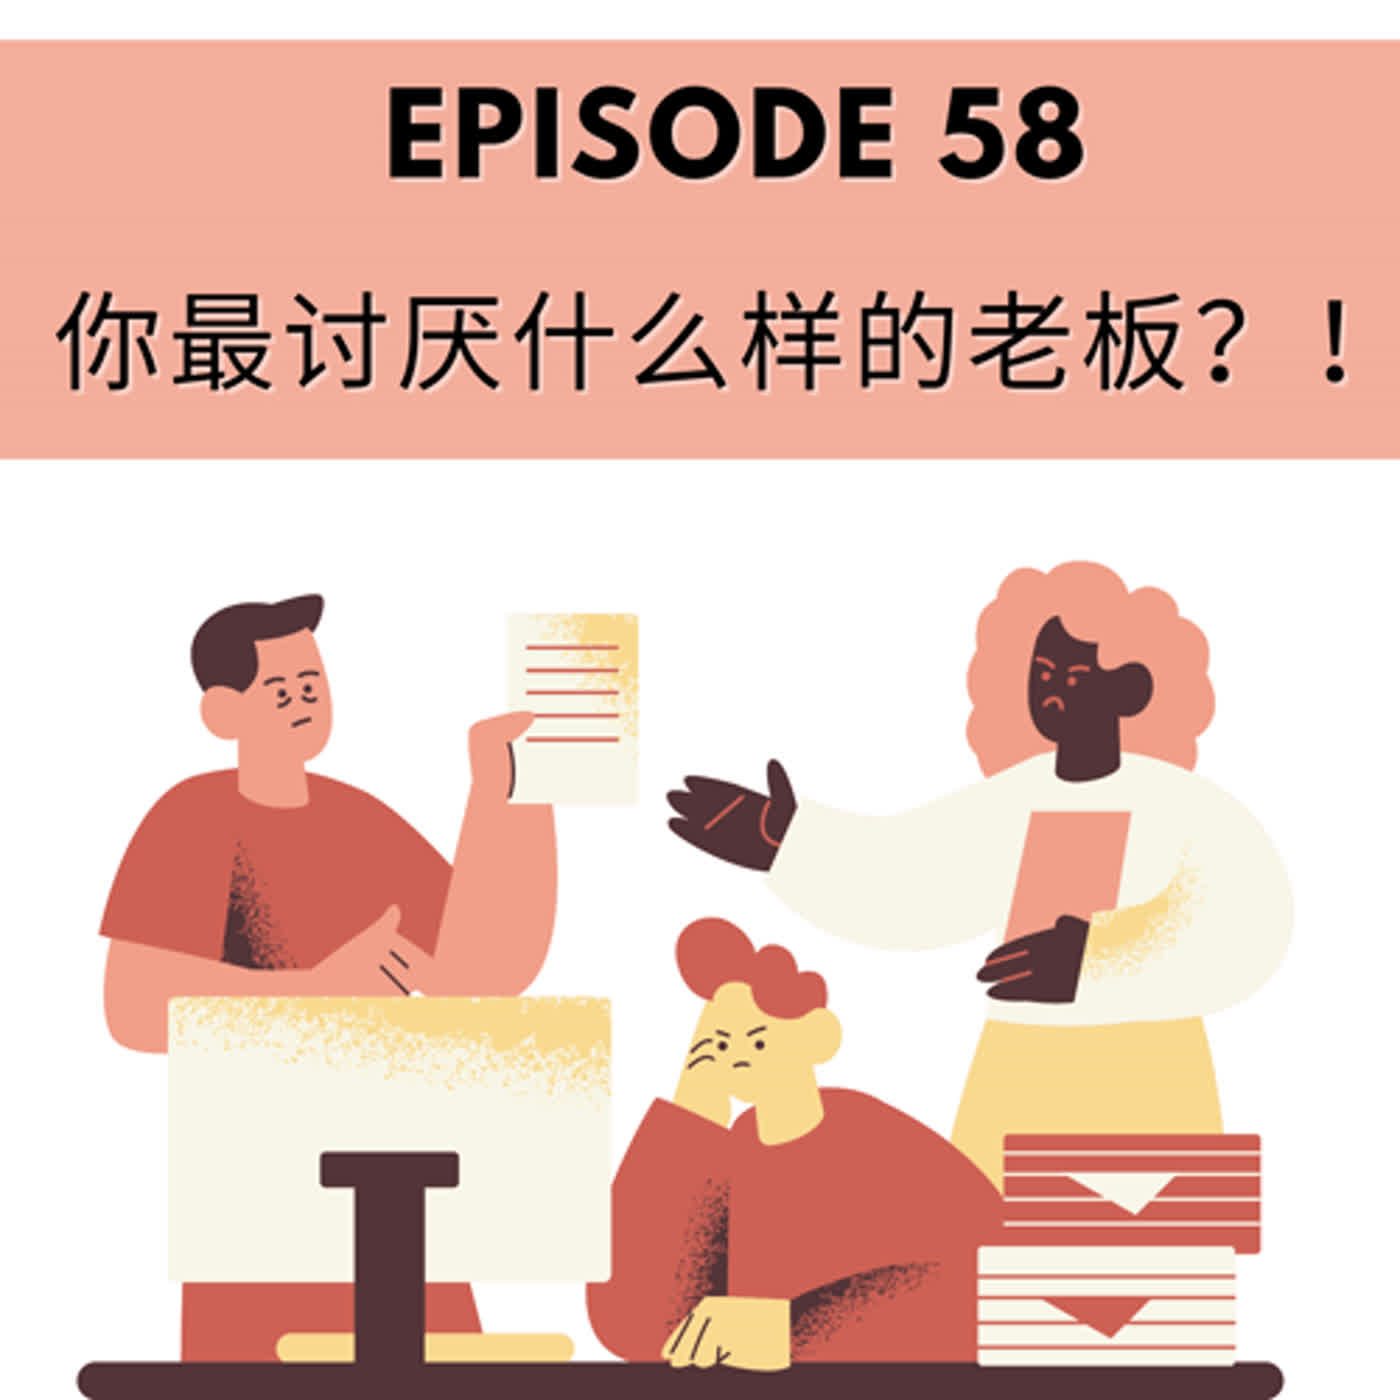 Episode 58 |  你最讨厌什么样的老板？What type of boss is the worst?